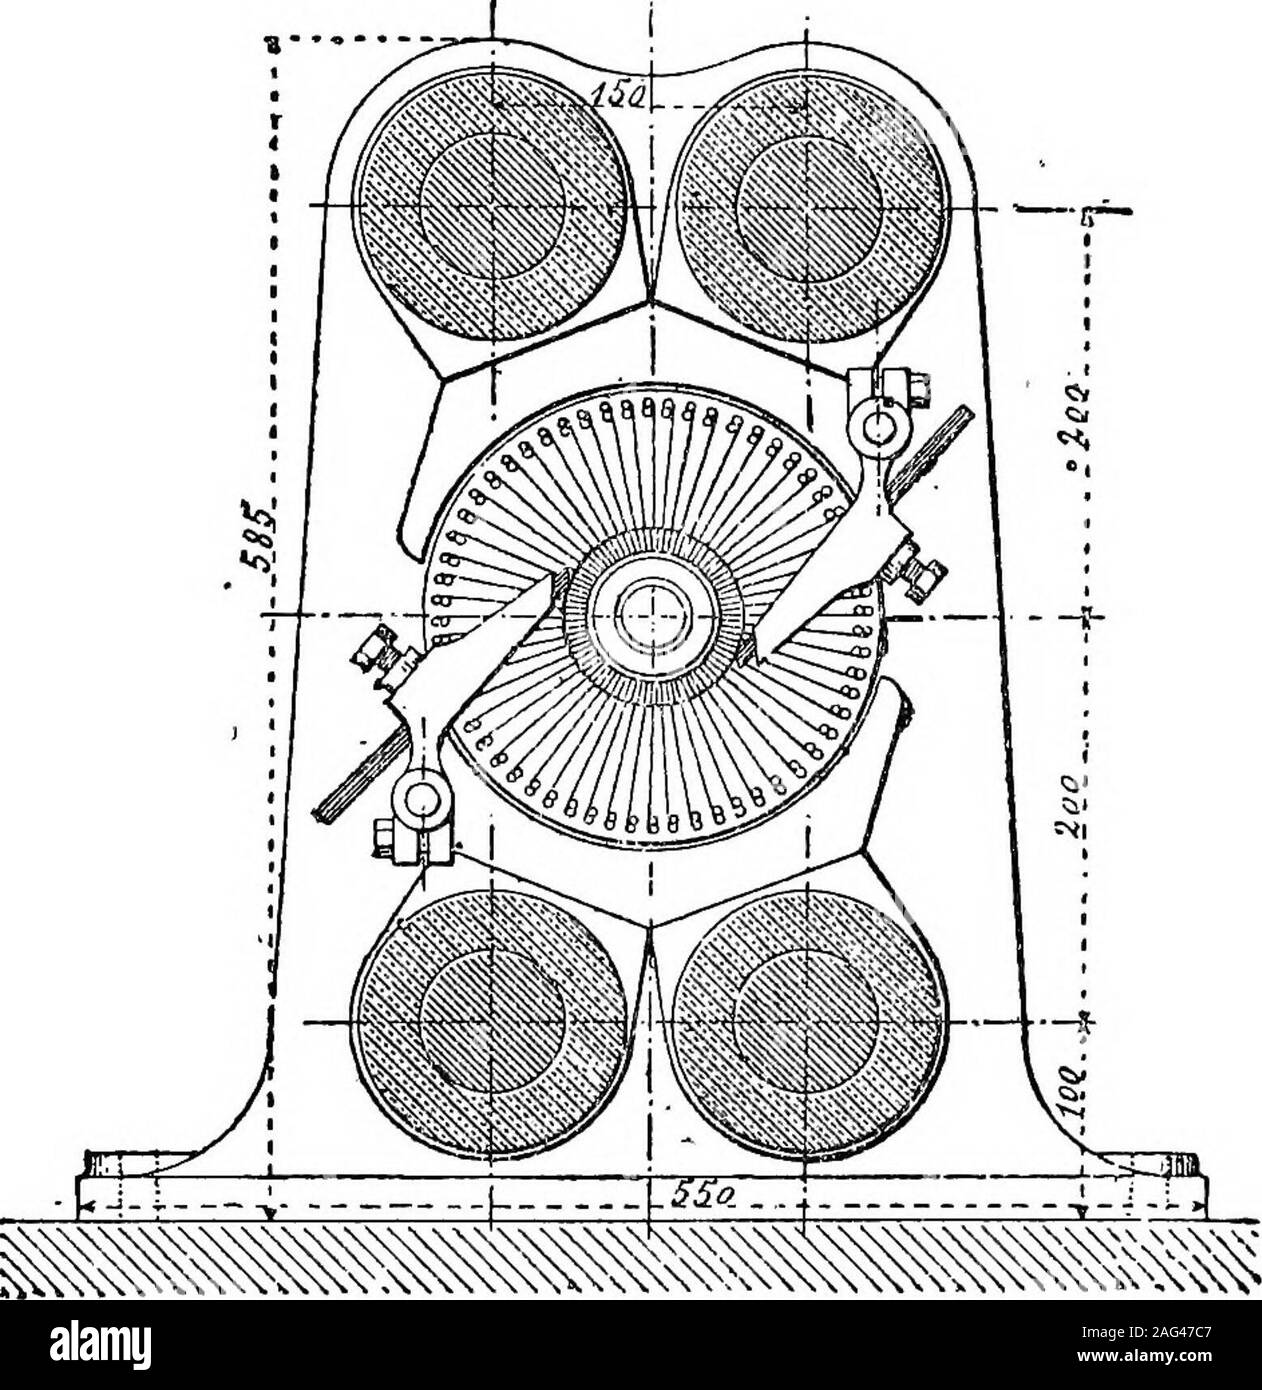 . Electric transmission of power : its present position and advantages. quantity, by winding the ring vdth fine or coarse wire.With equal velocities of the ring the electric tension willbe proportional to the number of convolutions of the wire. THE GRAMME MACHINE. 9 FigB. 6 and 7 represent a Gramme macliine; it consistsof two flanks of cast iron, arranged vertically, and con-nected by four iron bars, serving as cores to electro-magnets. The axle is of steel; its bearings are relativelyvery long. The central ring has two wires wound parallel Fig. 7.. on the soft iron, and connected to two colle Stock Photo